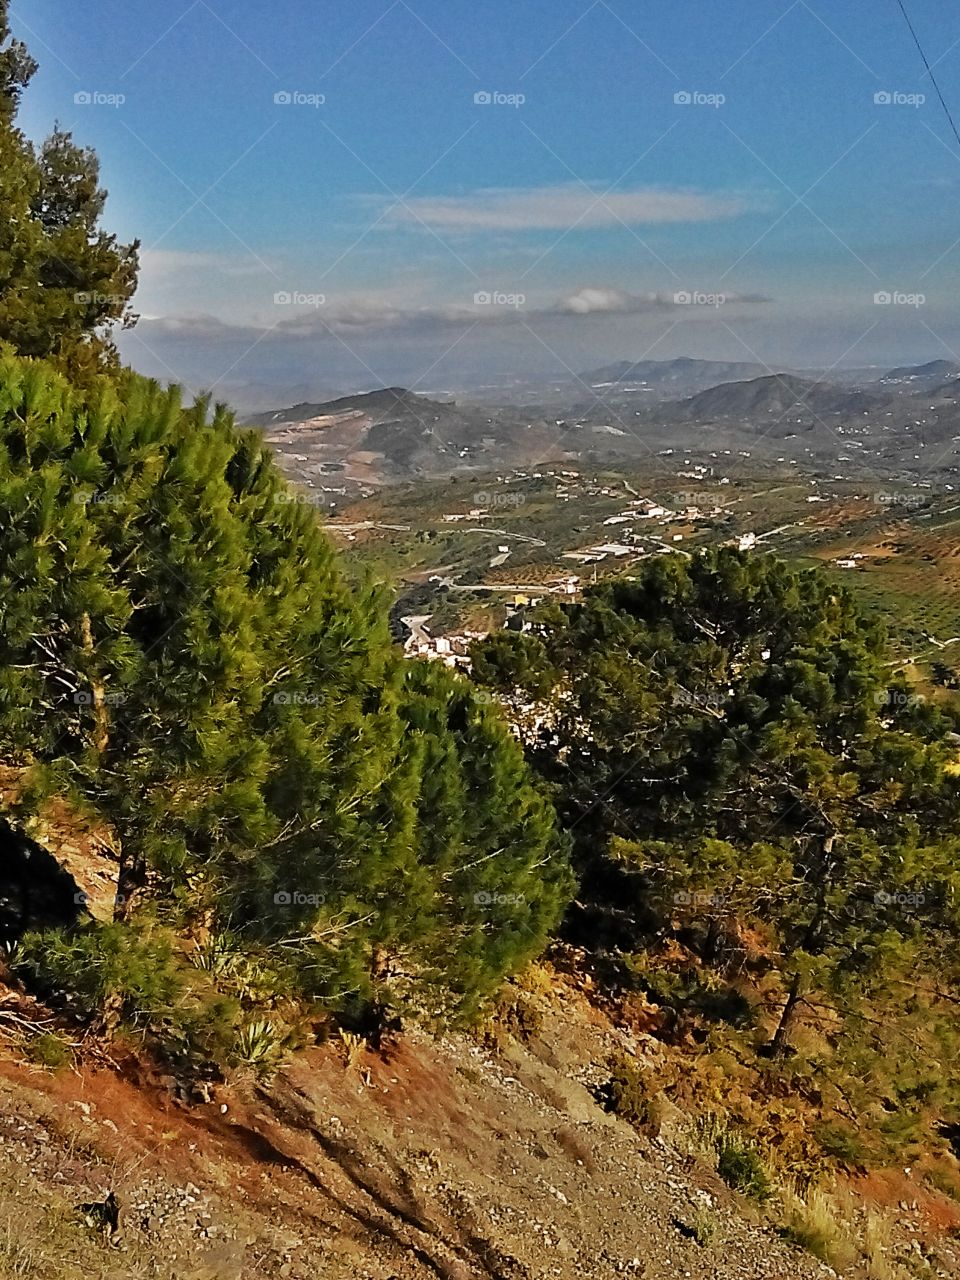 Mountain view, Andalucia . Tolox pueblo blanco from above,  Spain 